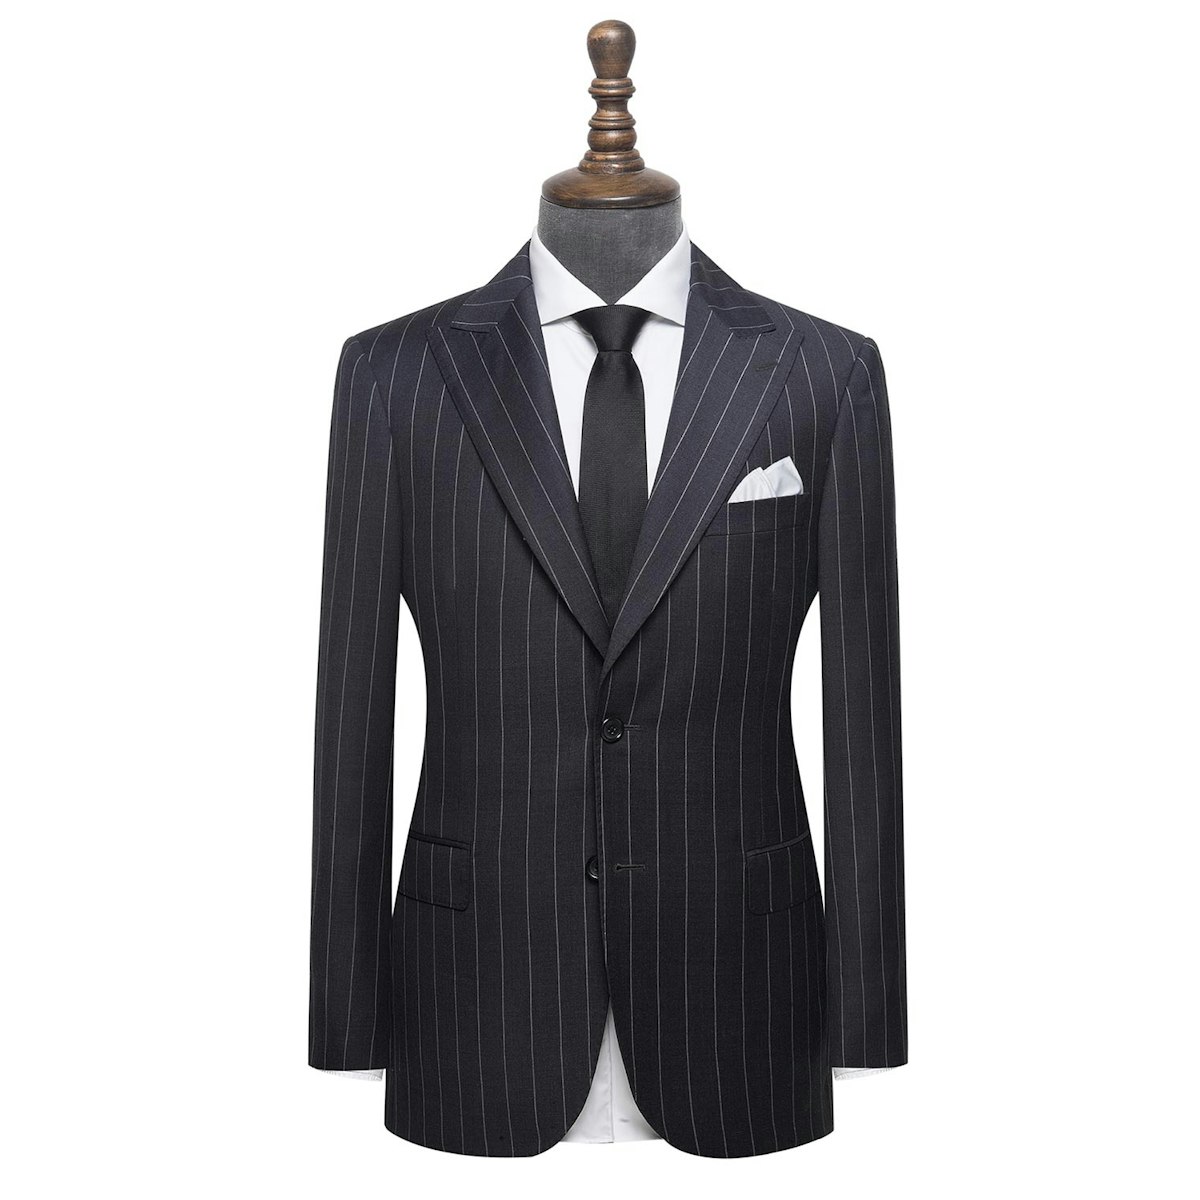 InStitchu Collection The Lincoln mens suit